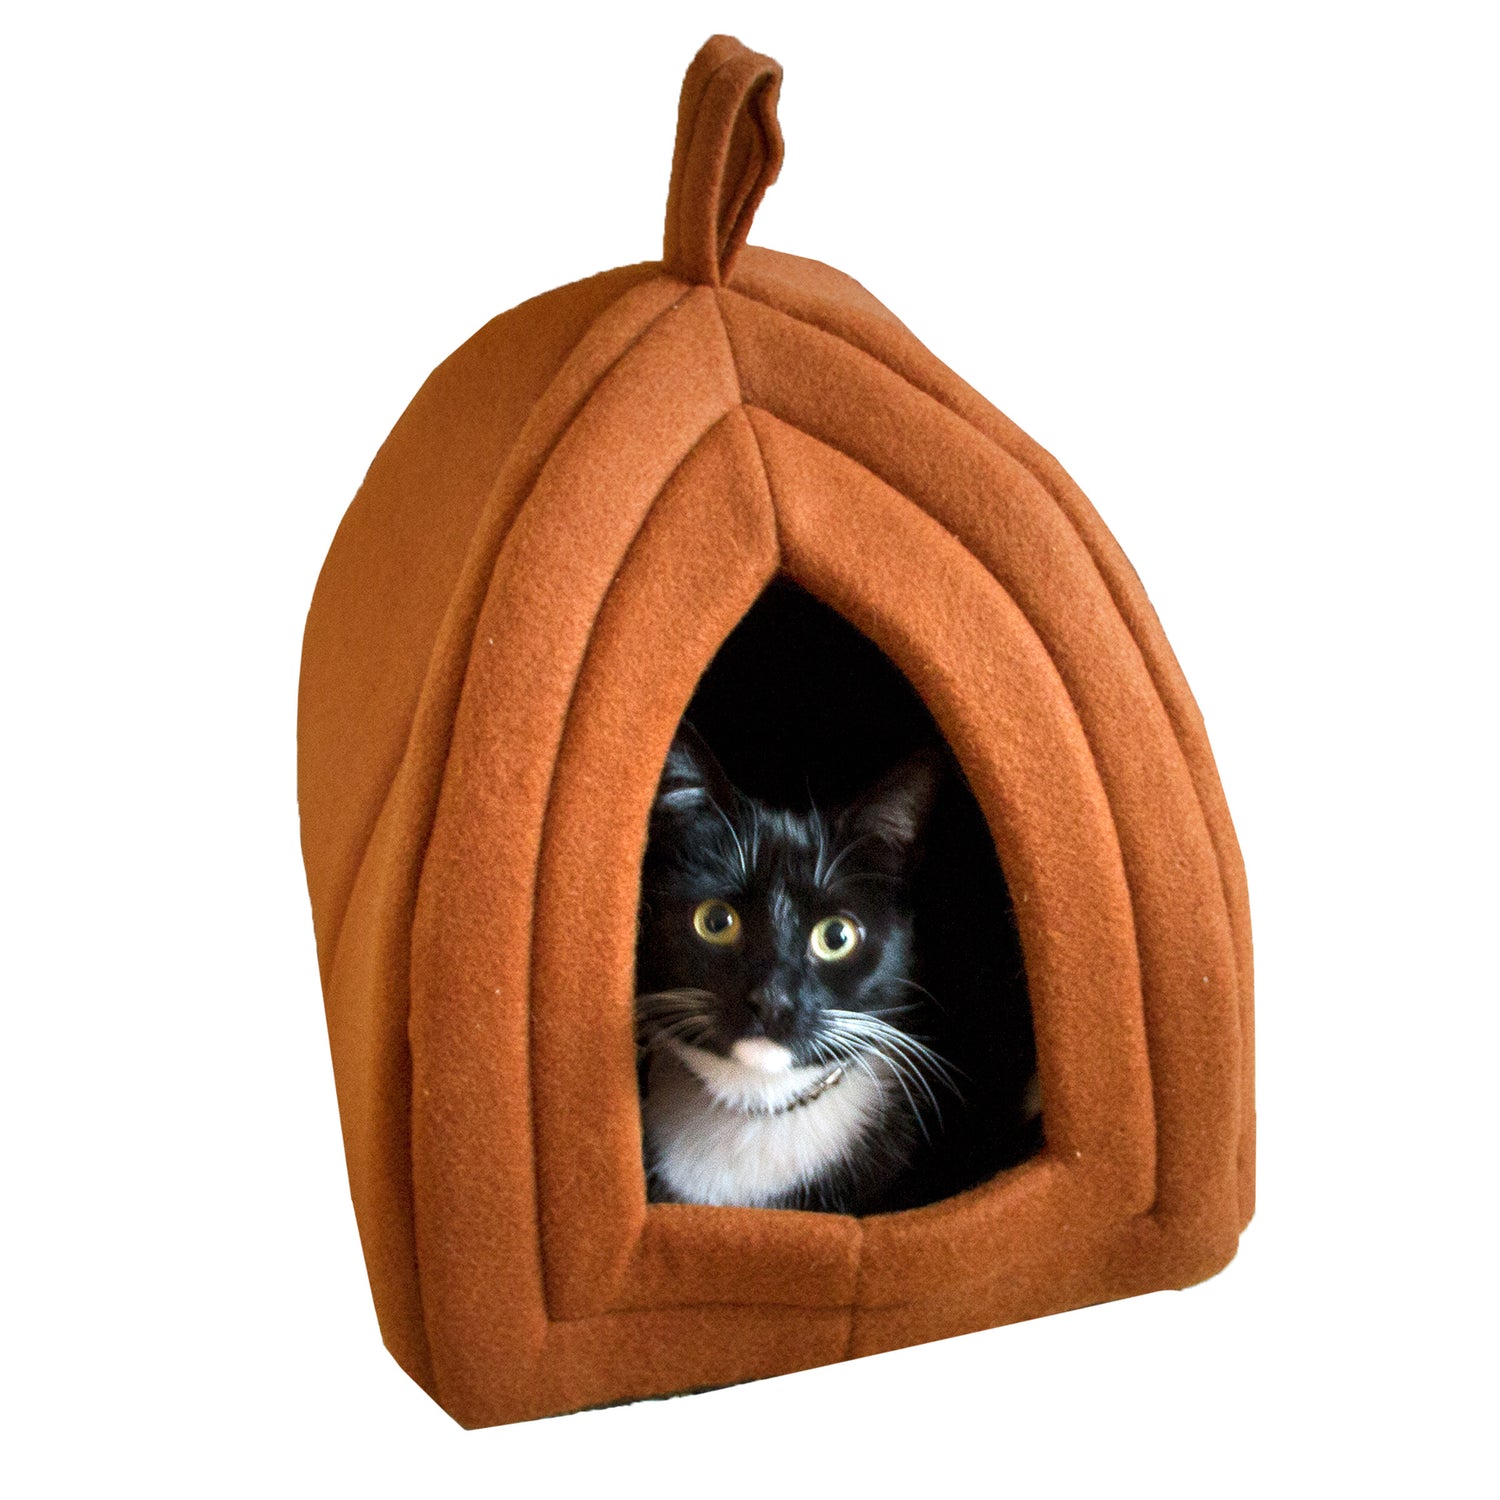 PETMAKER Cozy Kitty Tent Igloo Plush Enclosed Cat Bed